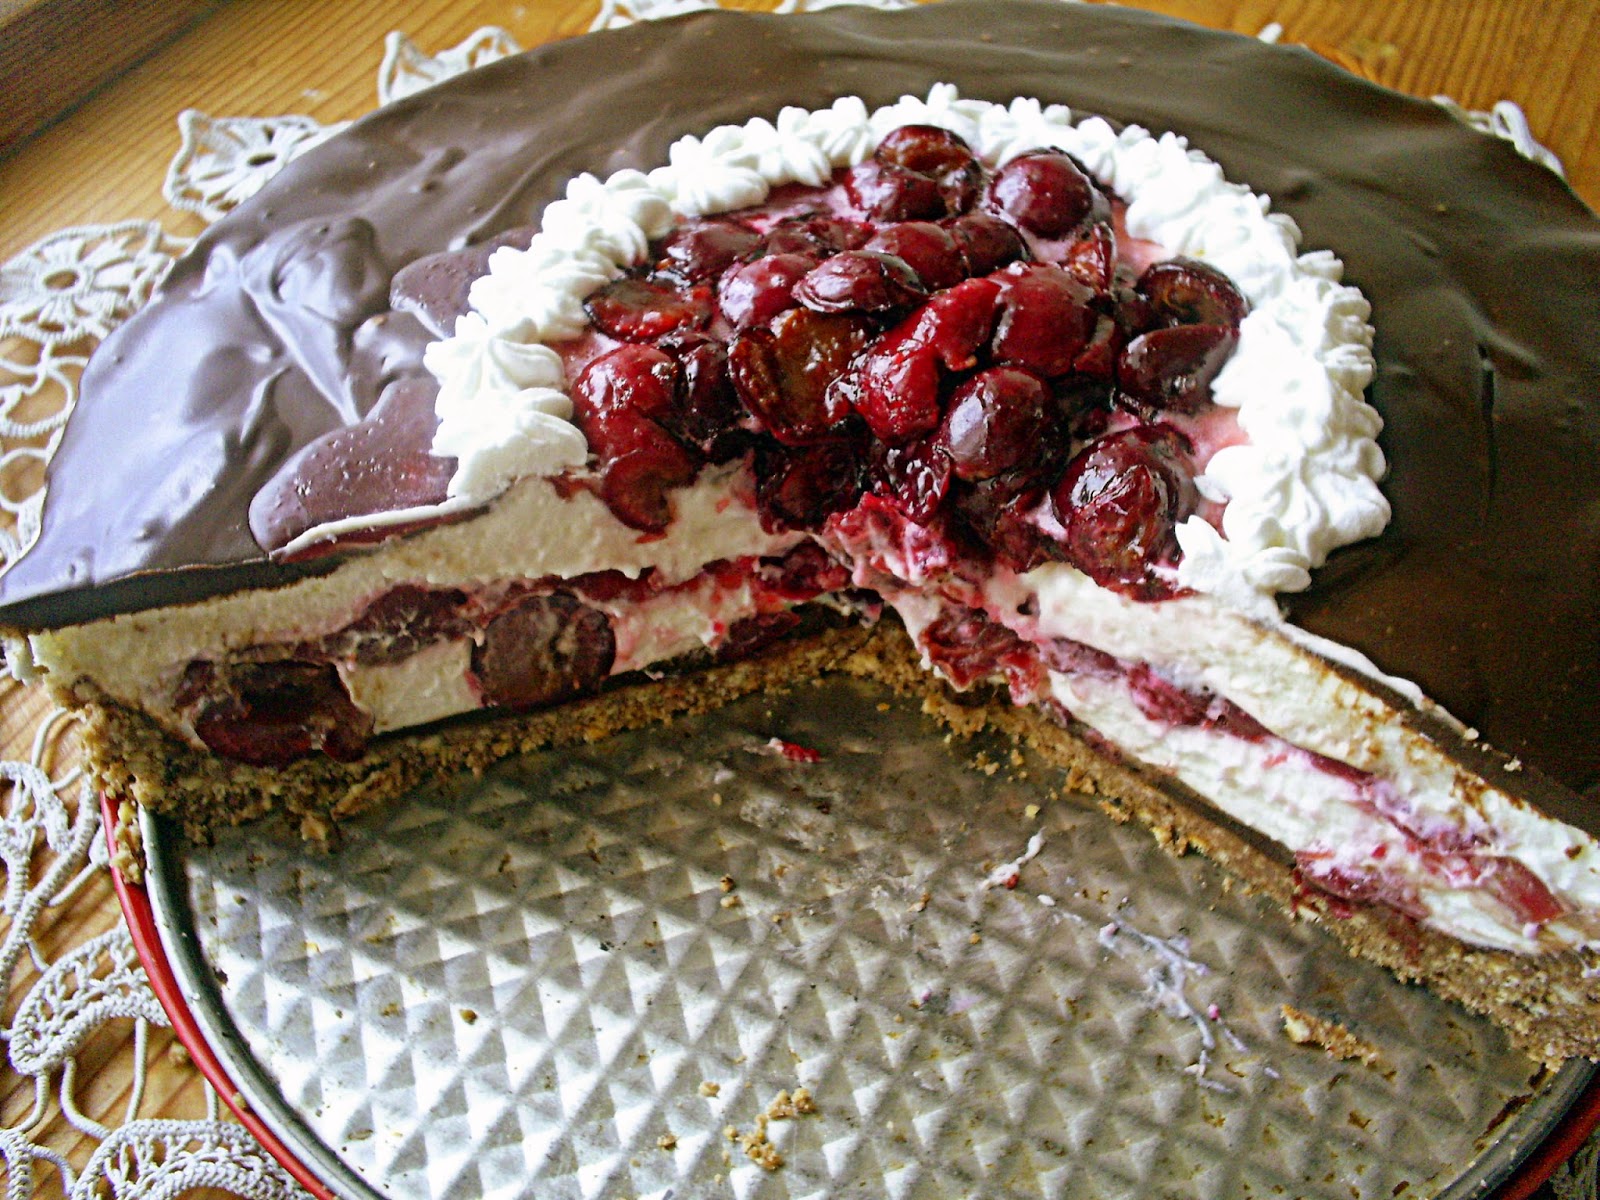 Black Forest Cheesecake